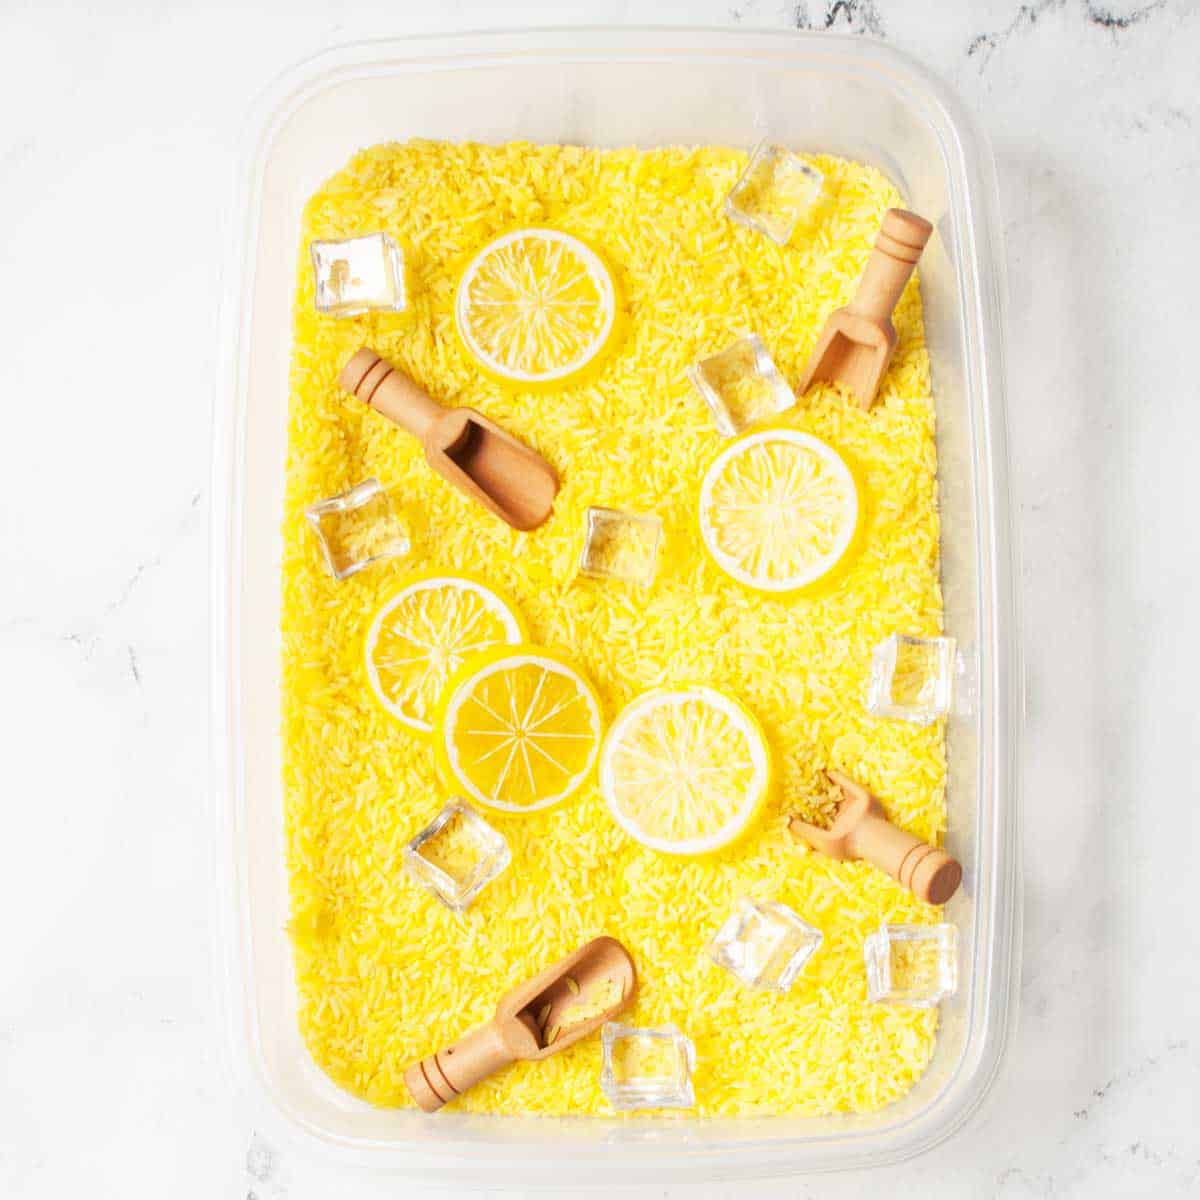 A lemonade sensory bin (rice dyed yellow with toy lemon slices, ice cubes and wooden scoops).